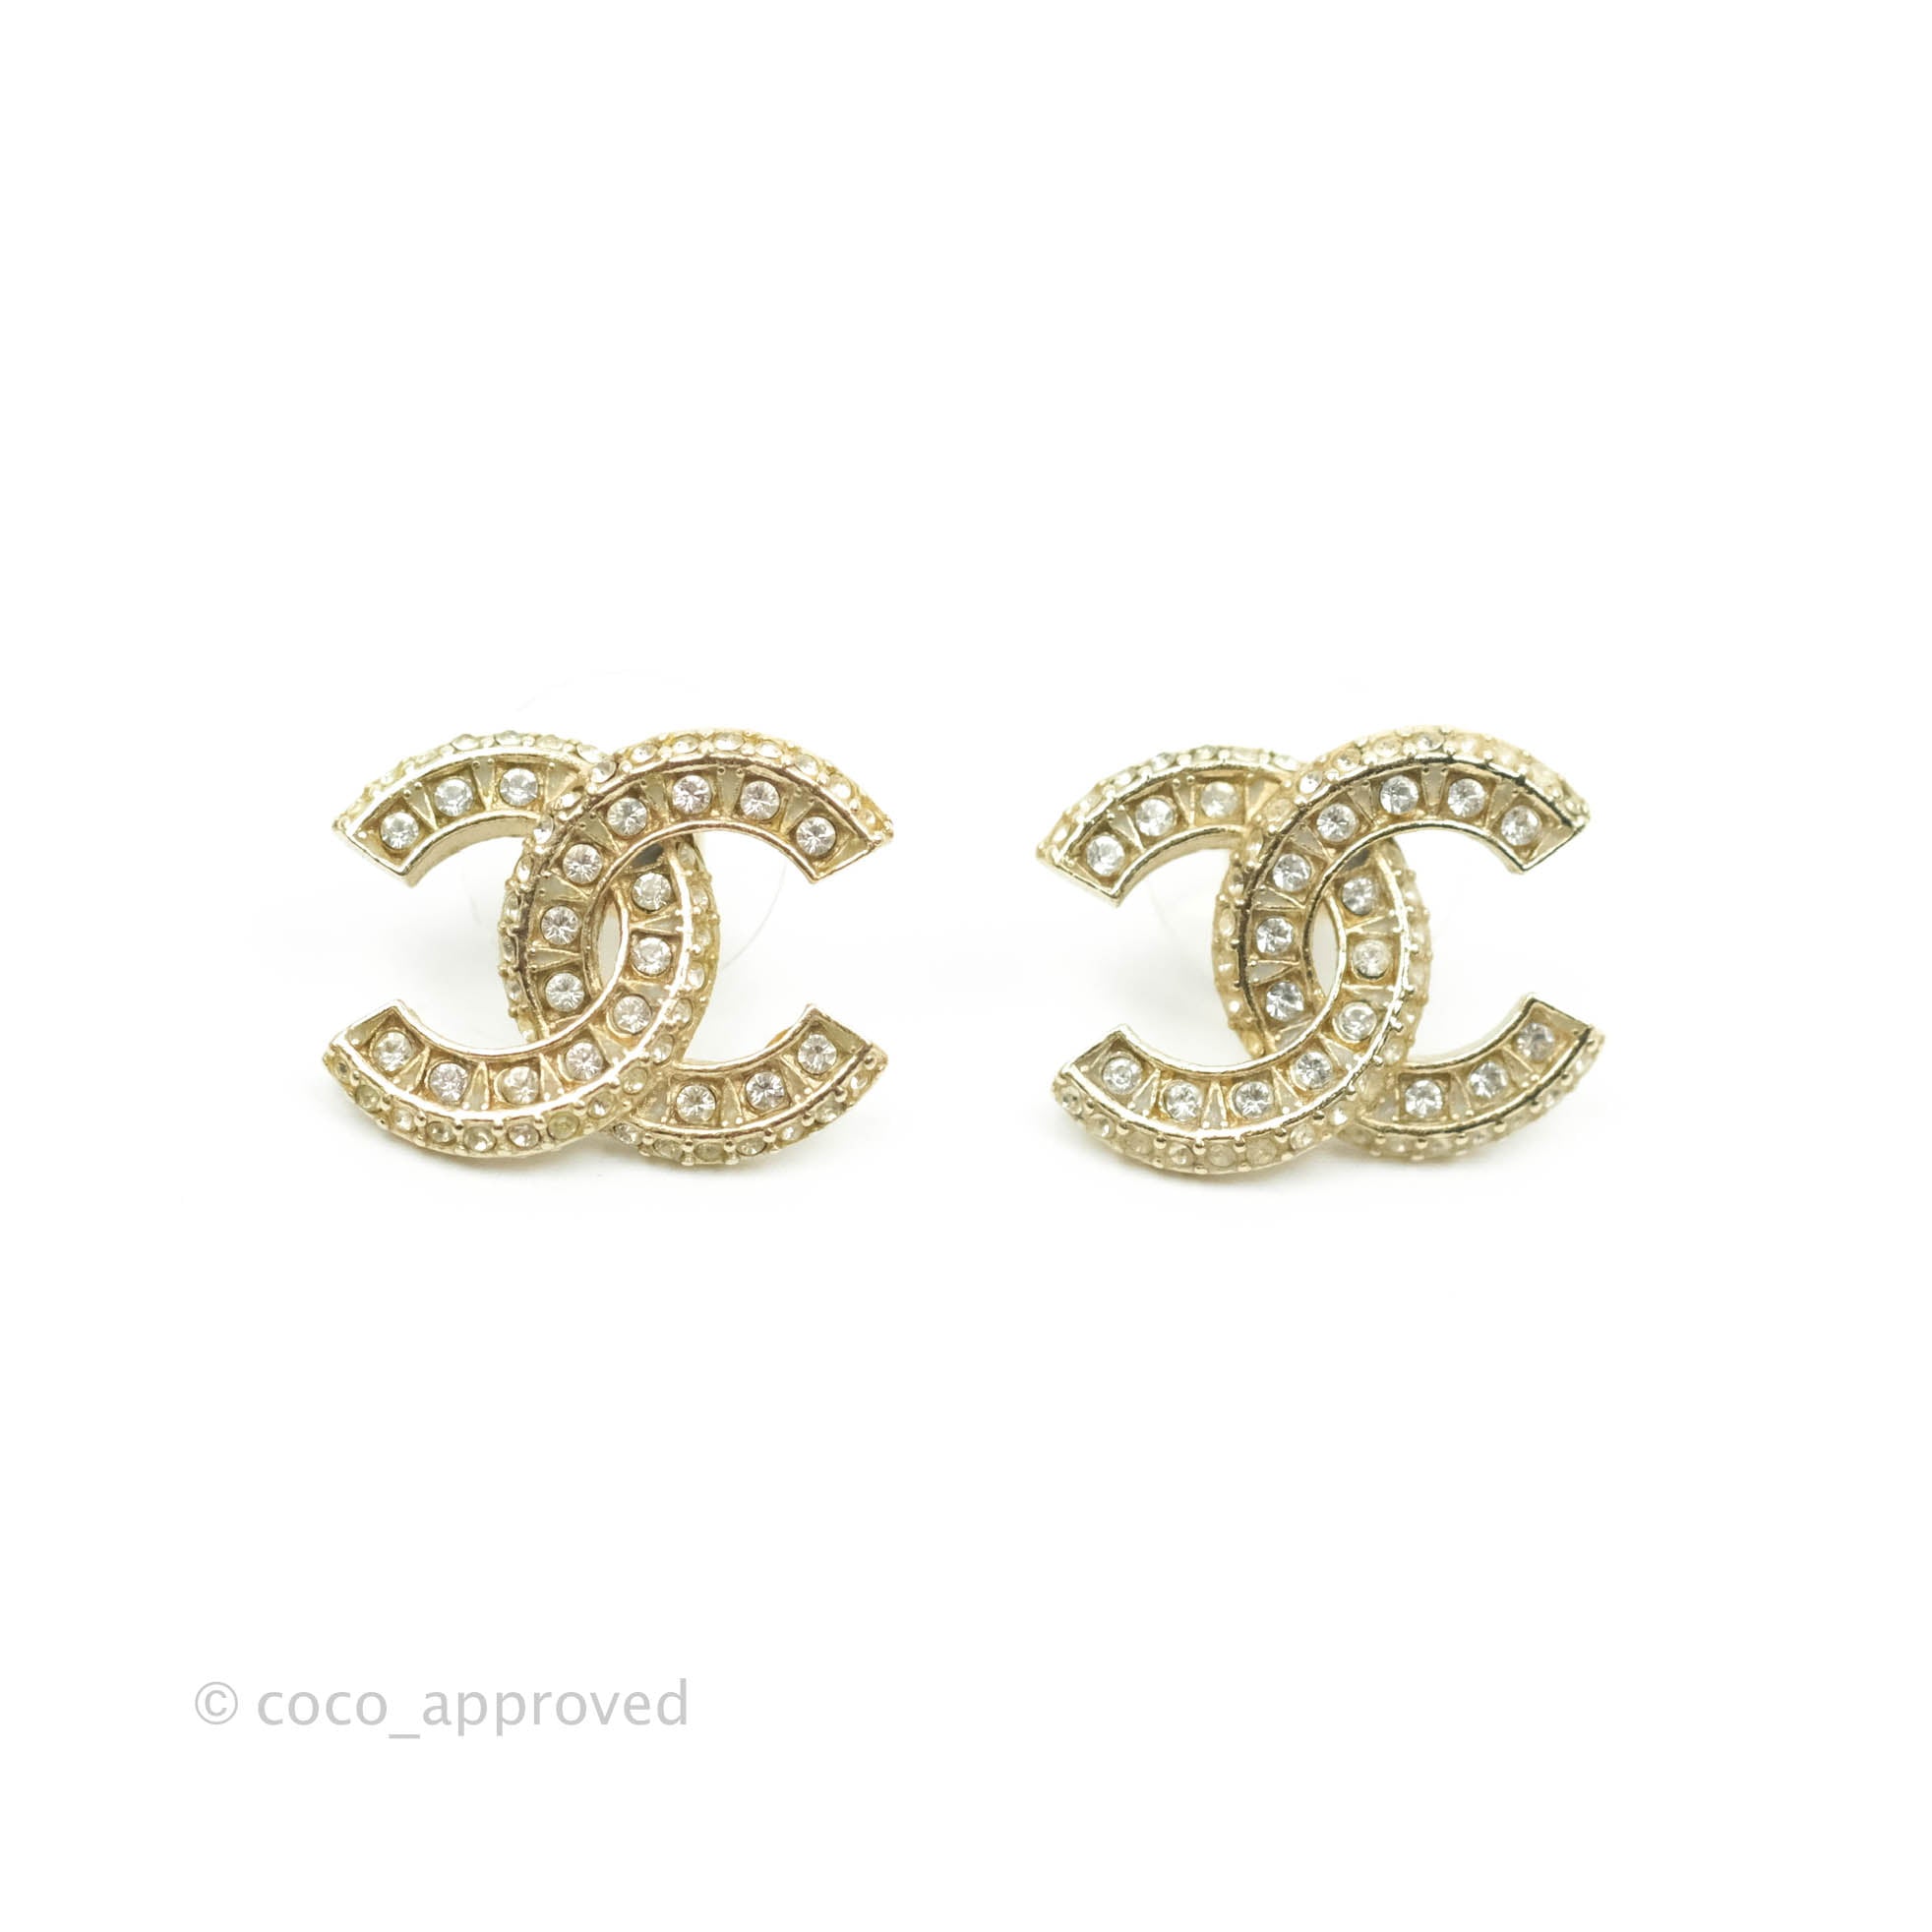 Cc crystal earrings Chanel Gold in Crystal - 23422727